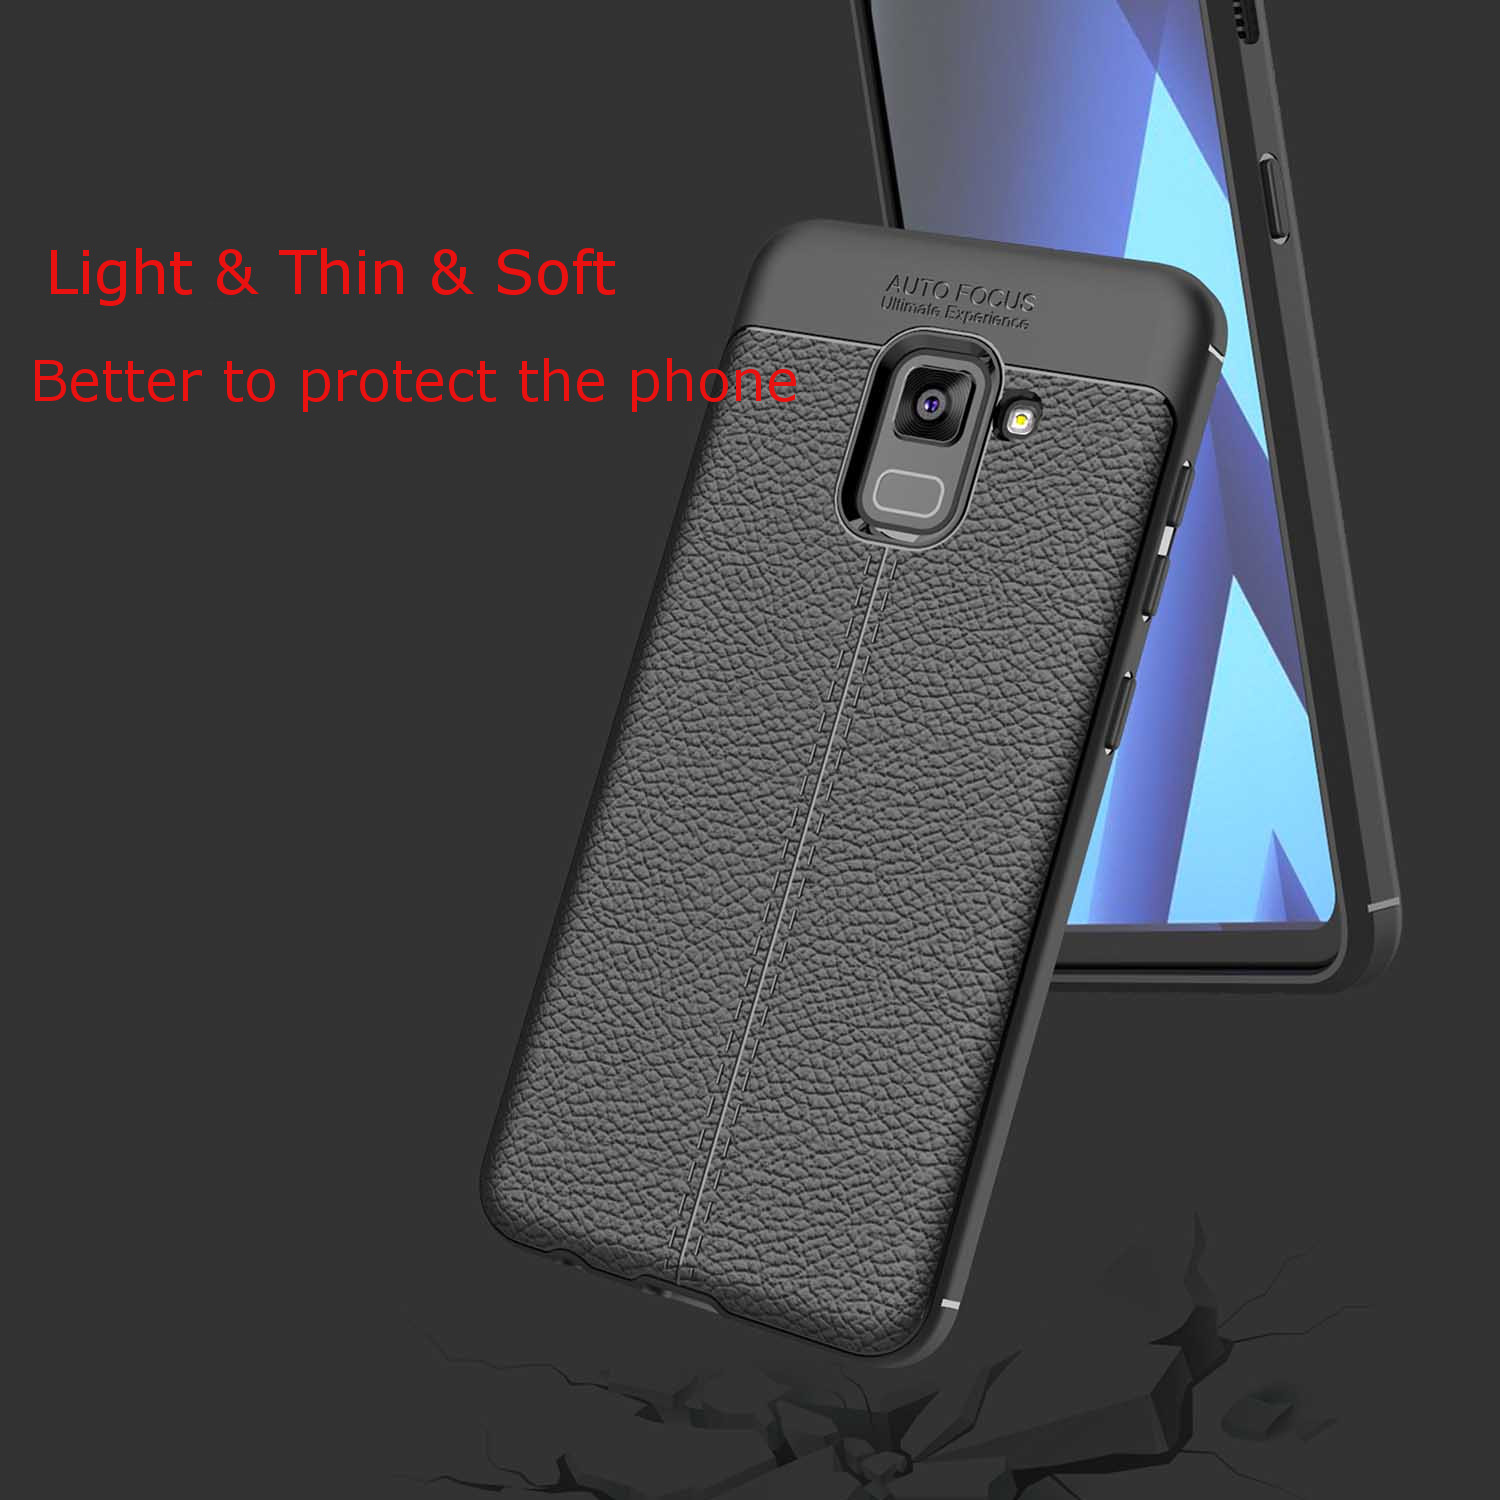 Bakeey-Anti-Fingerprint-Soft-TPU-Litchi-Leather-Case-for-Samsung-Galaxy-A8-Plus-2018-1270592